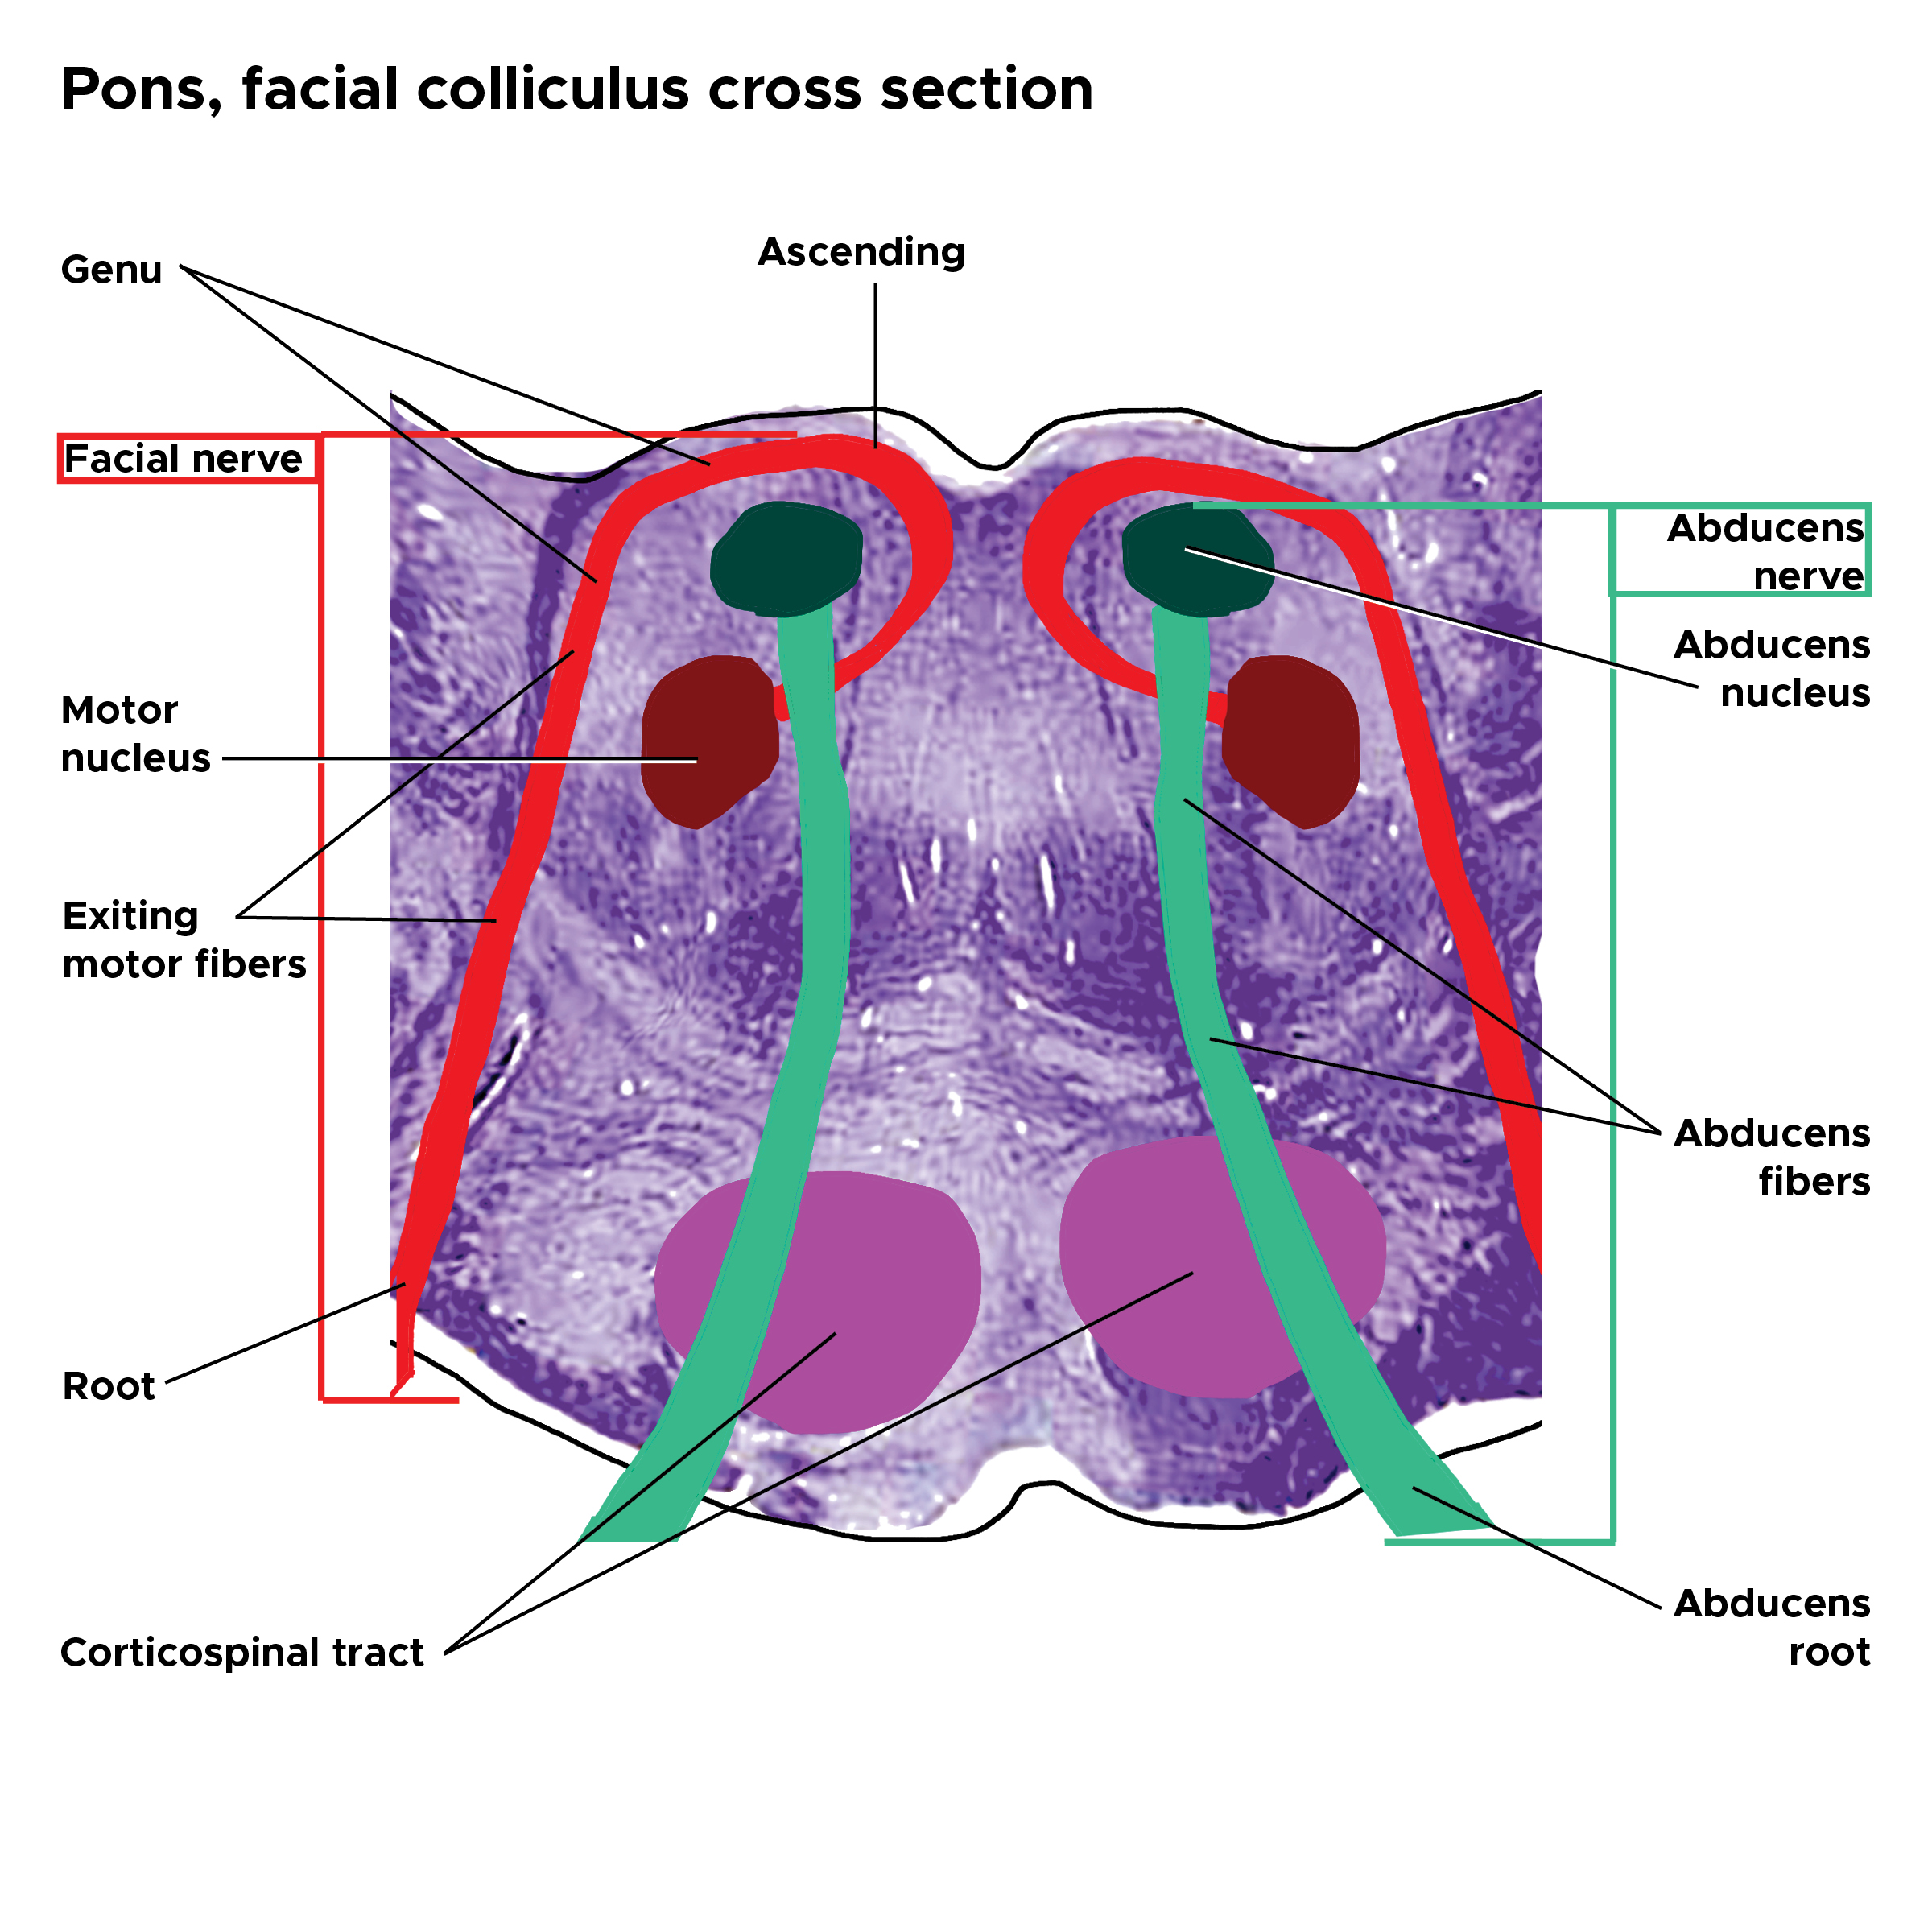 Illustration of cross section of the pons at the facial colliculus